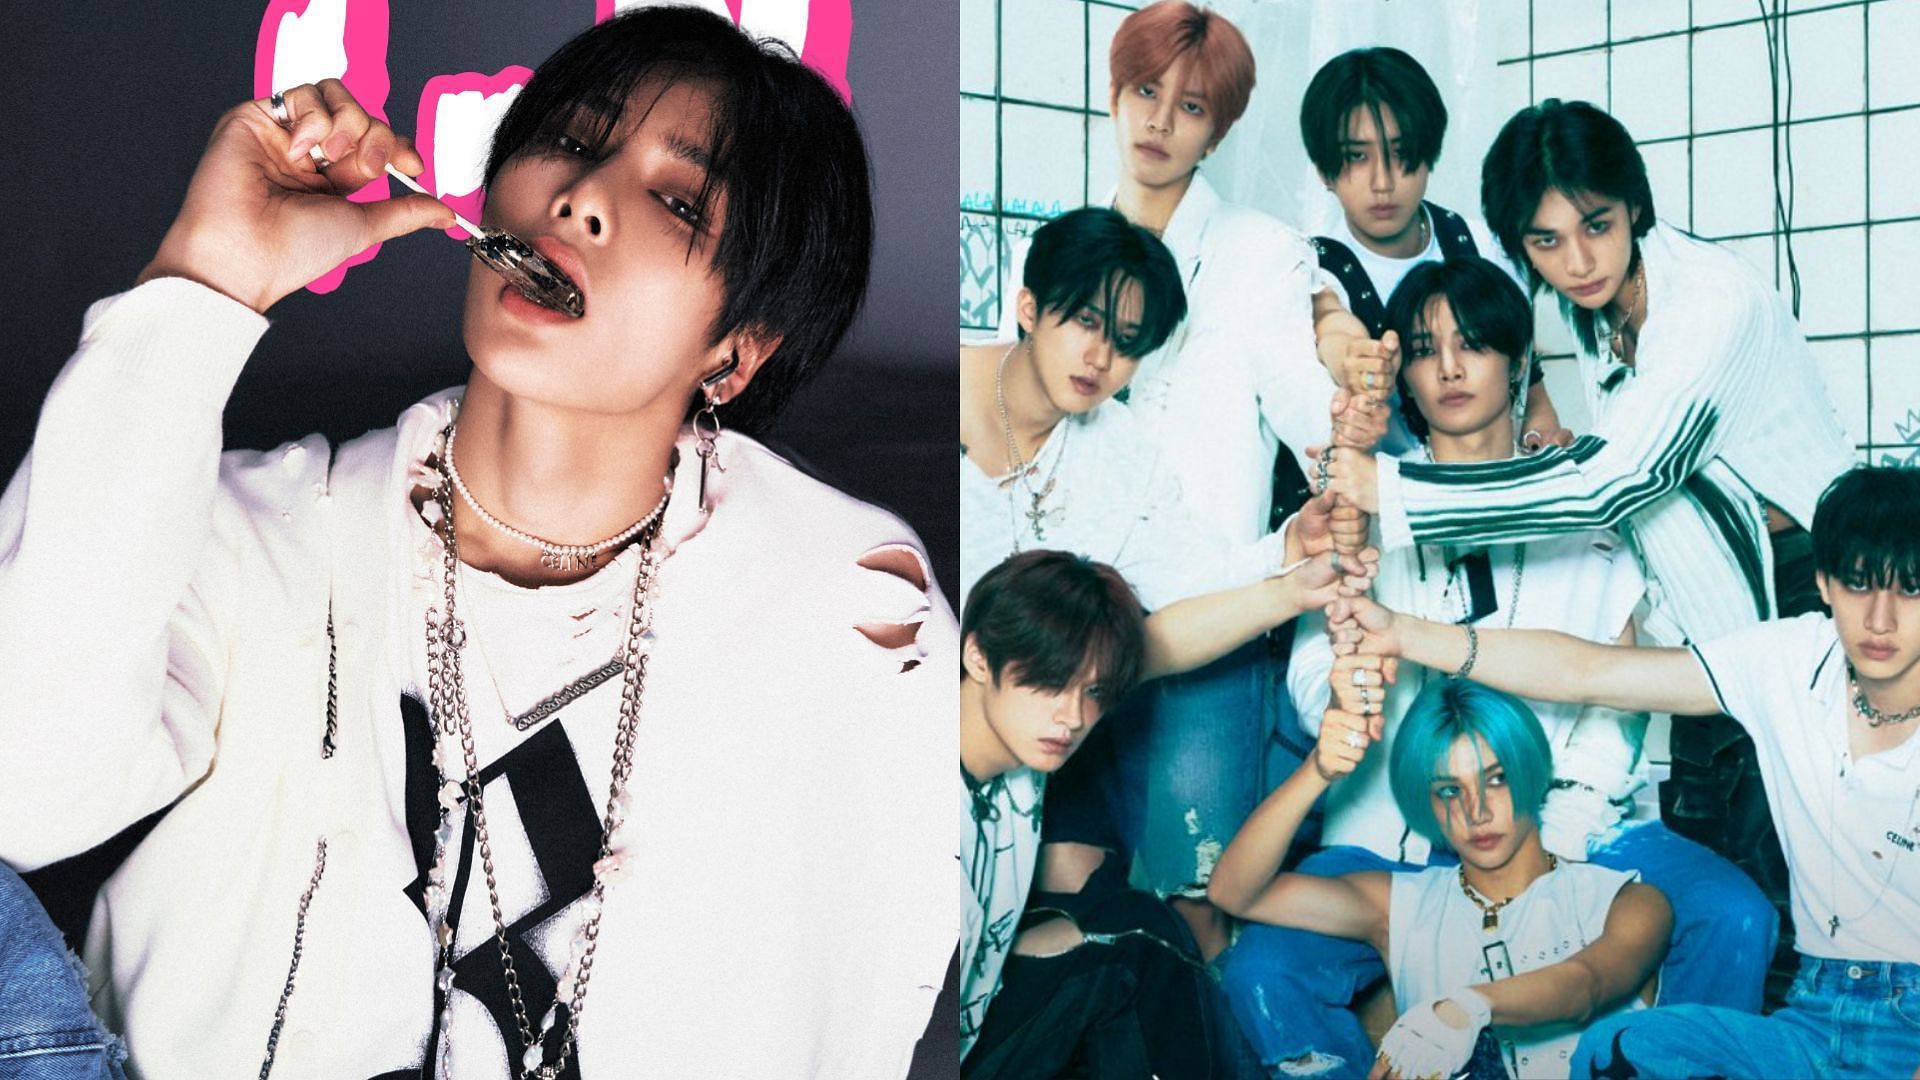 Why is 'Justice for I.N.' trending on X? Fans outraged at the Stray